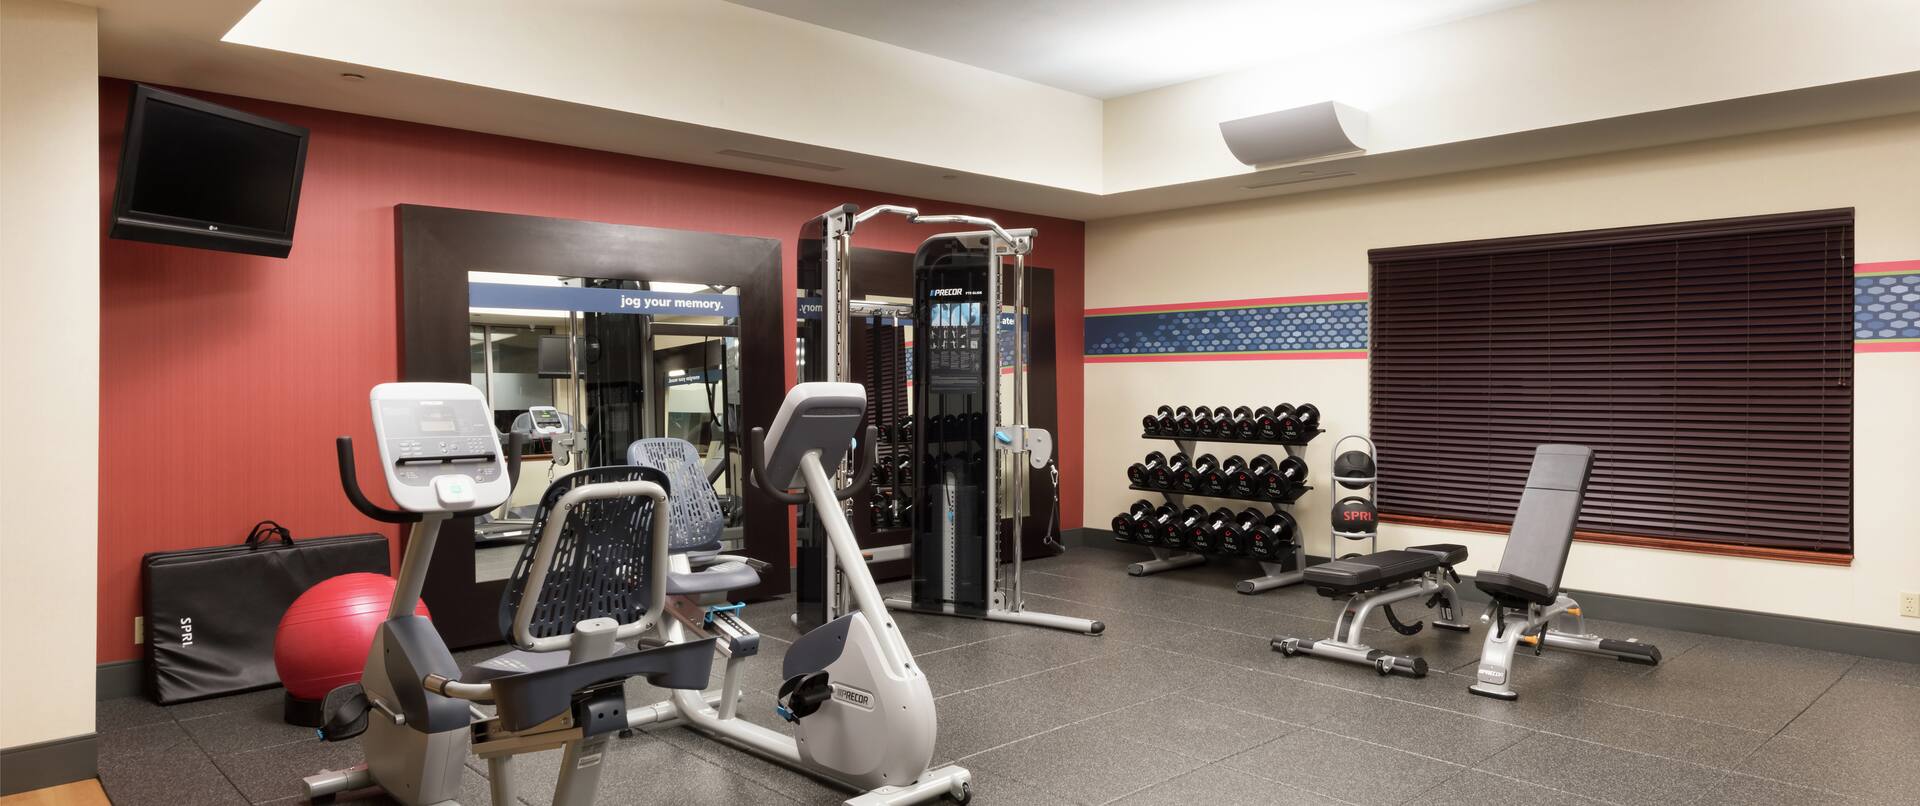 Fitness Center with Weights Treadmills and Recumbent Bikes